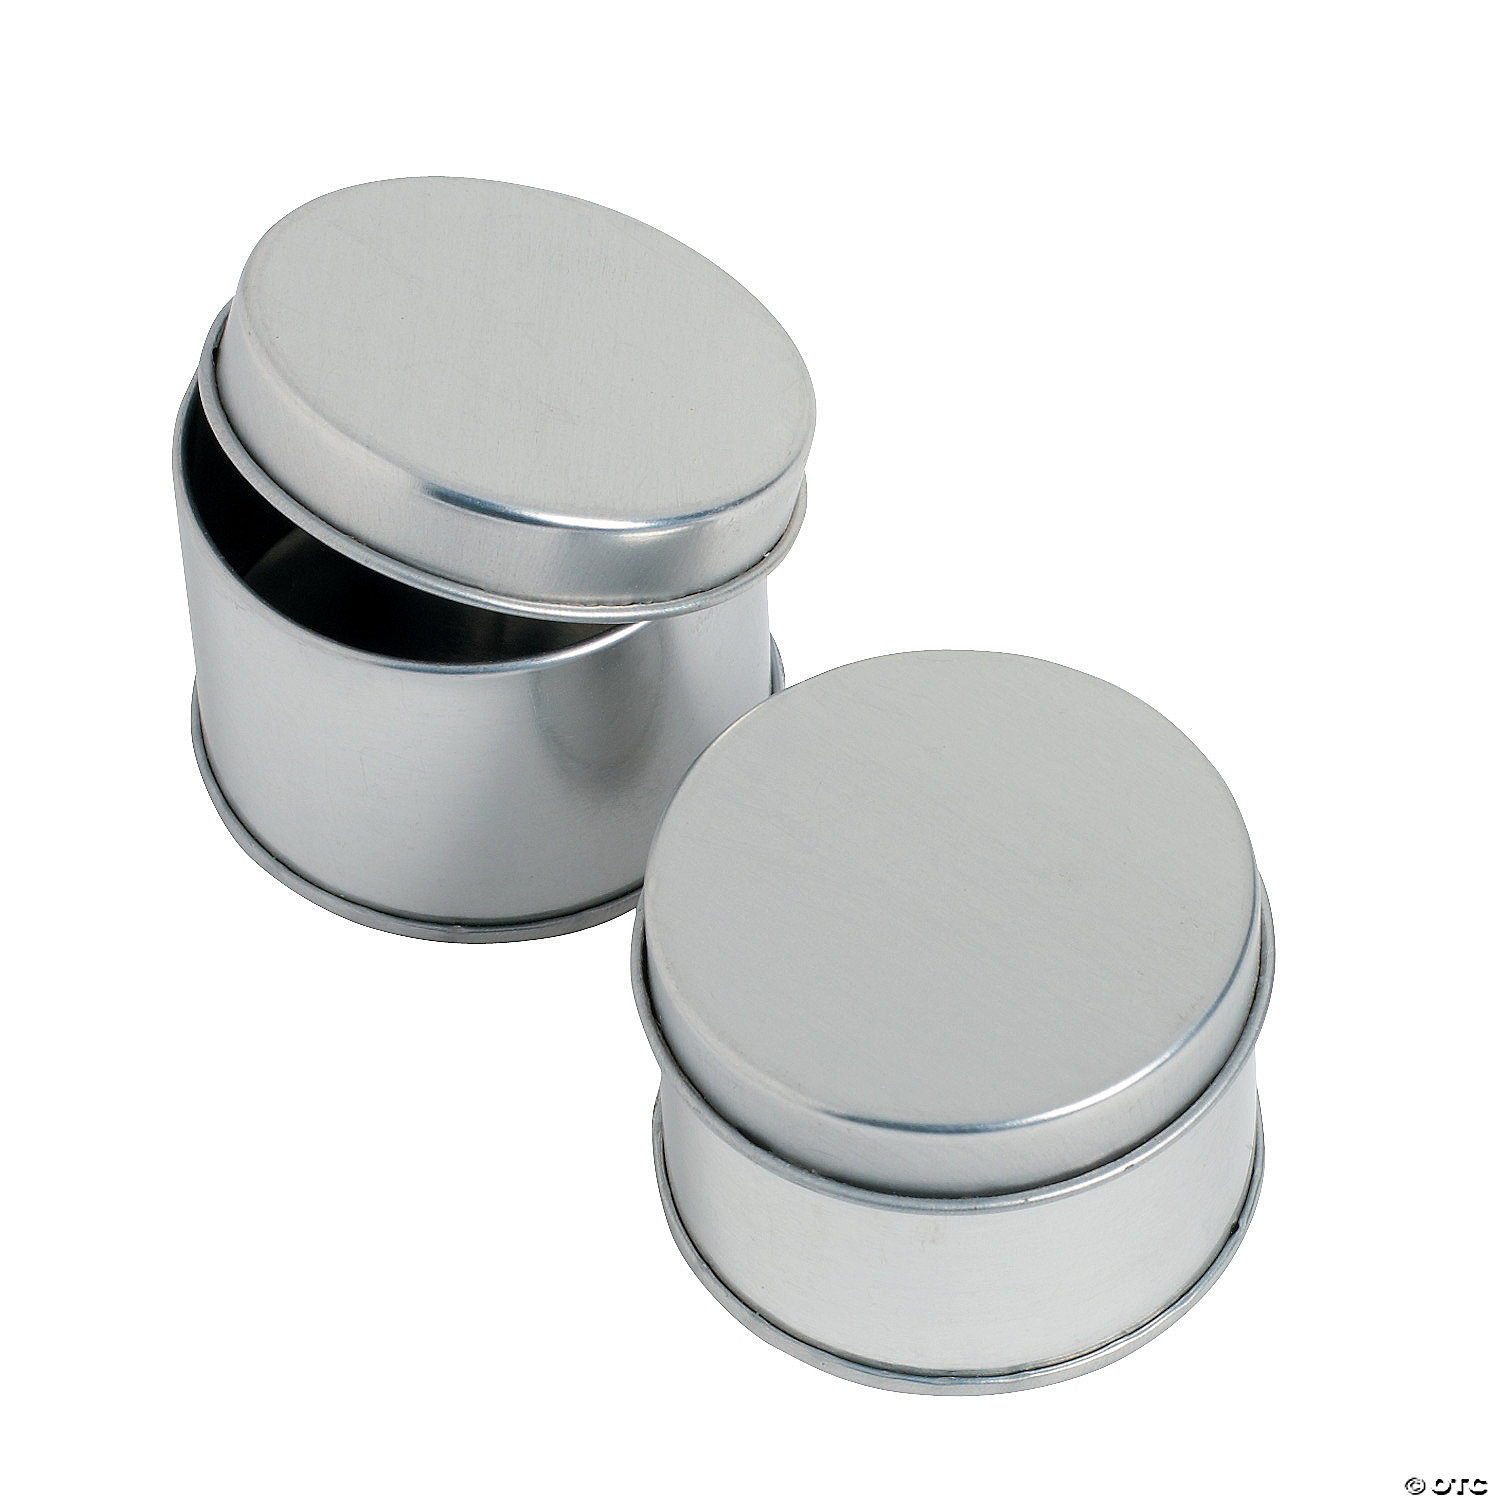 12 Small Silver Metal Gift Tin Tins Favor Box holds 1/2 oz & is 1.5" Diameter 